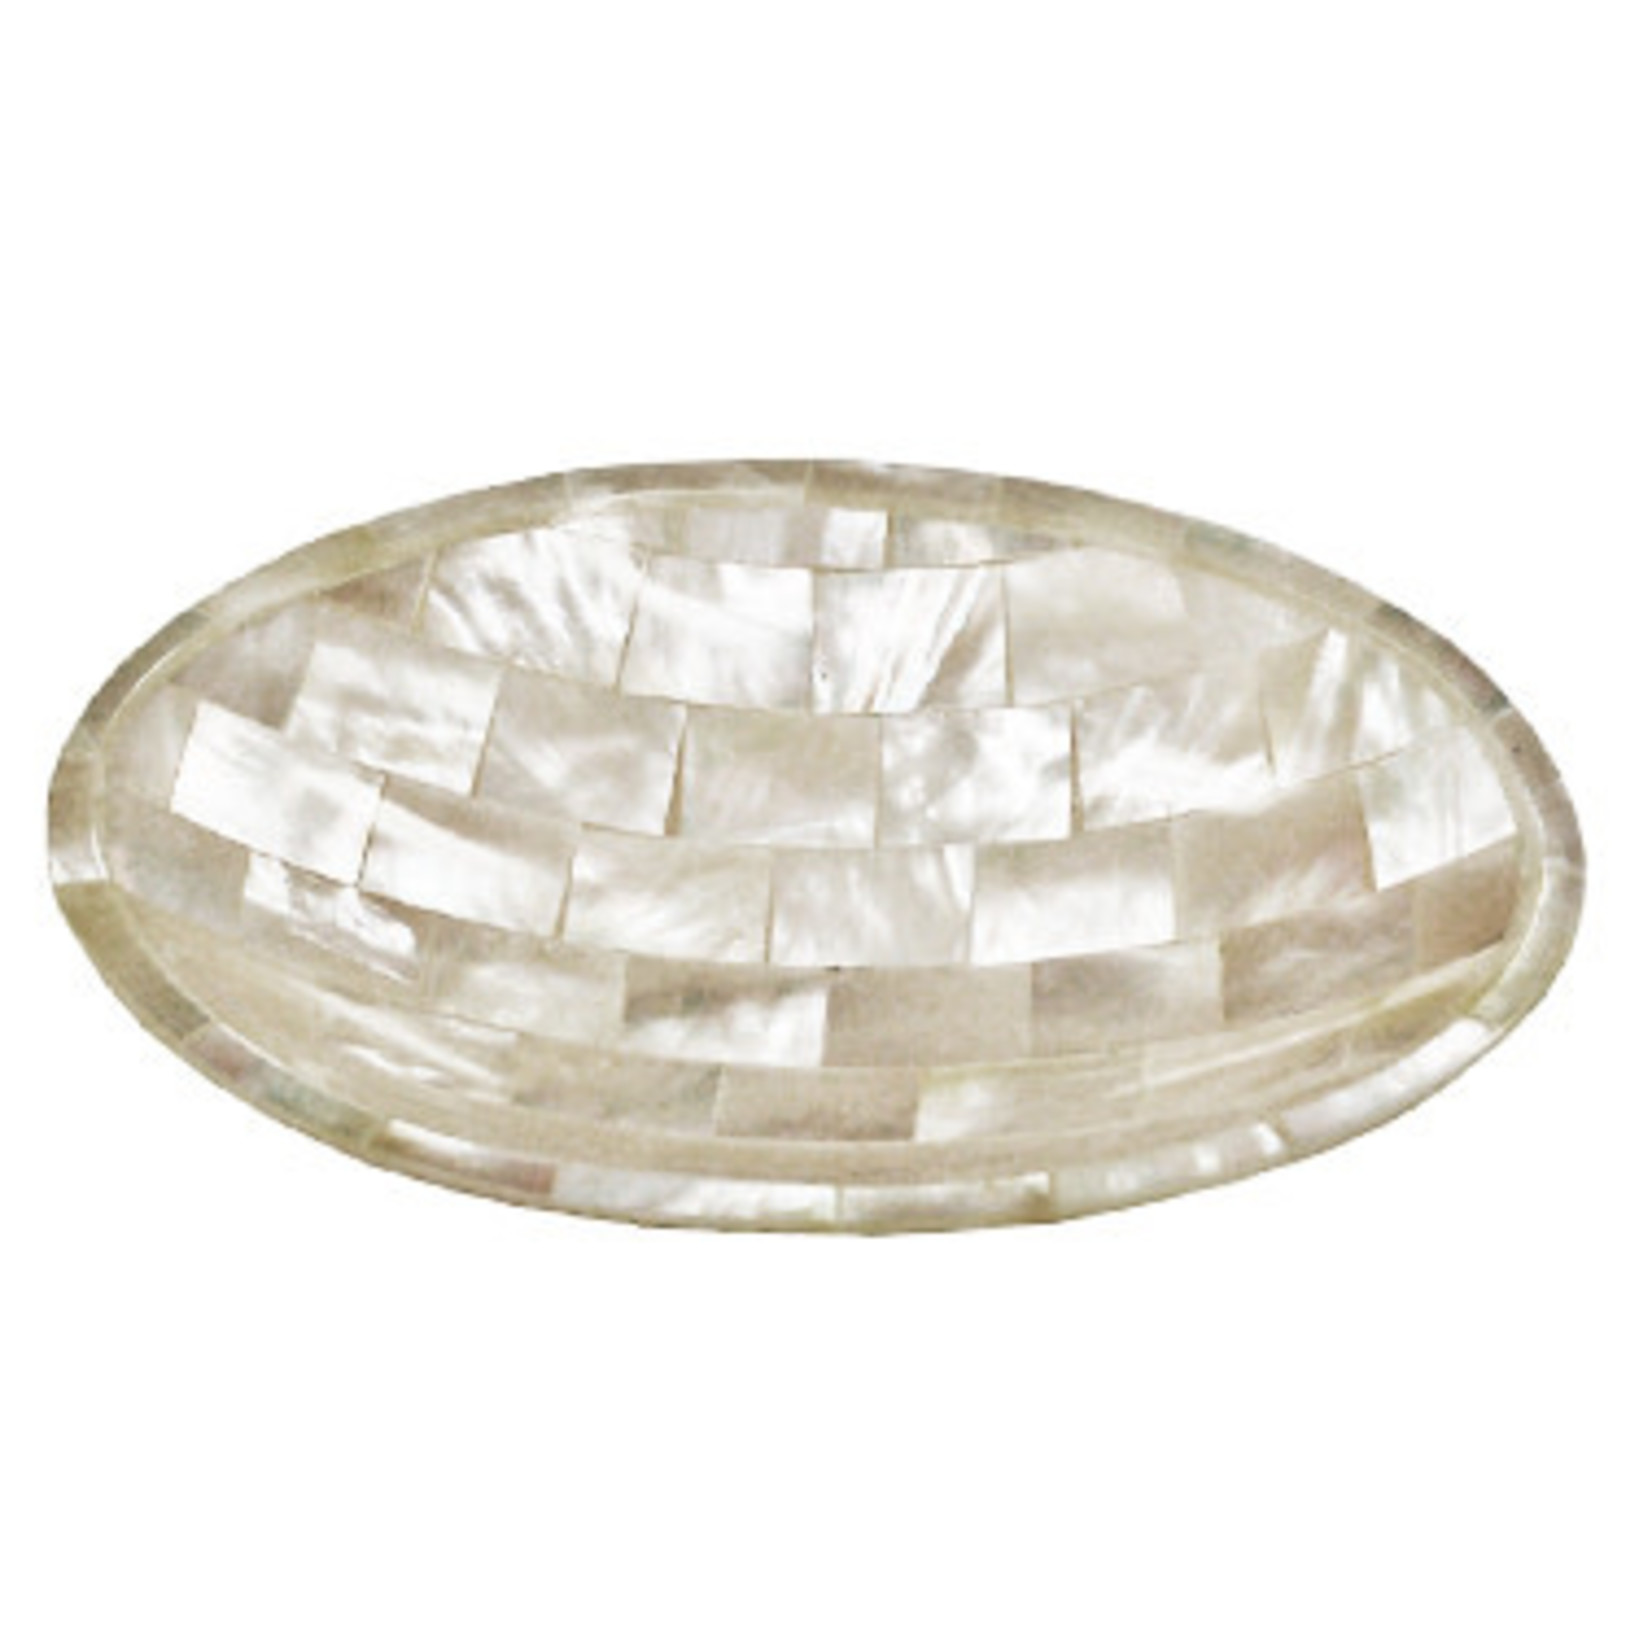 Handmade Mother of Pearl Mosaic Oval Dish 9cm x 7cm